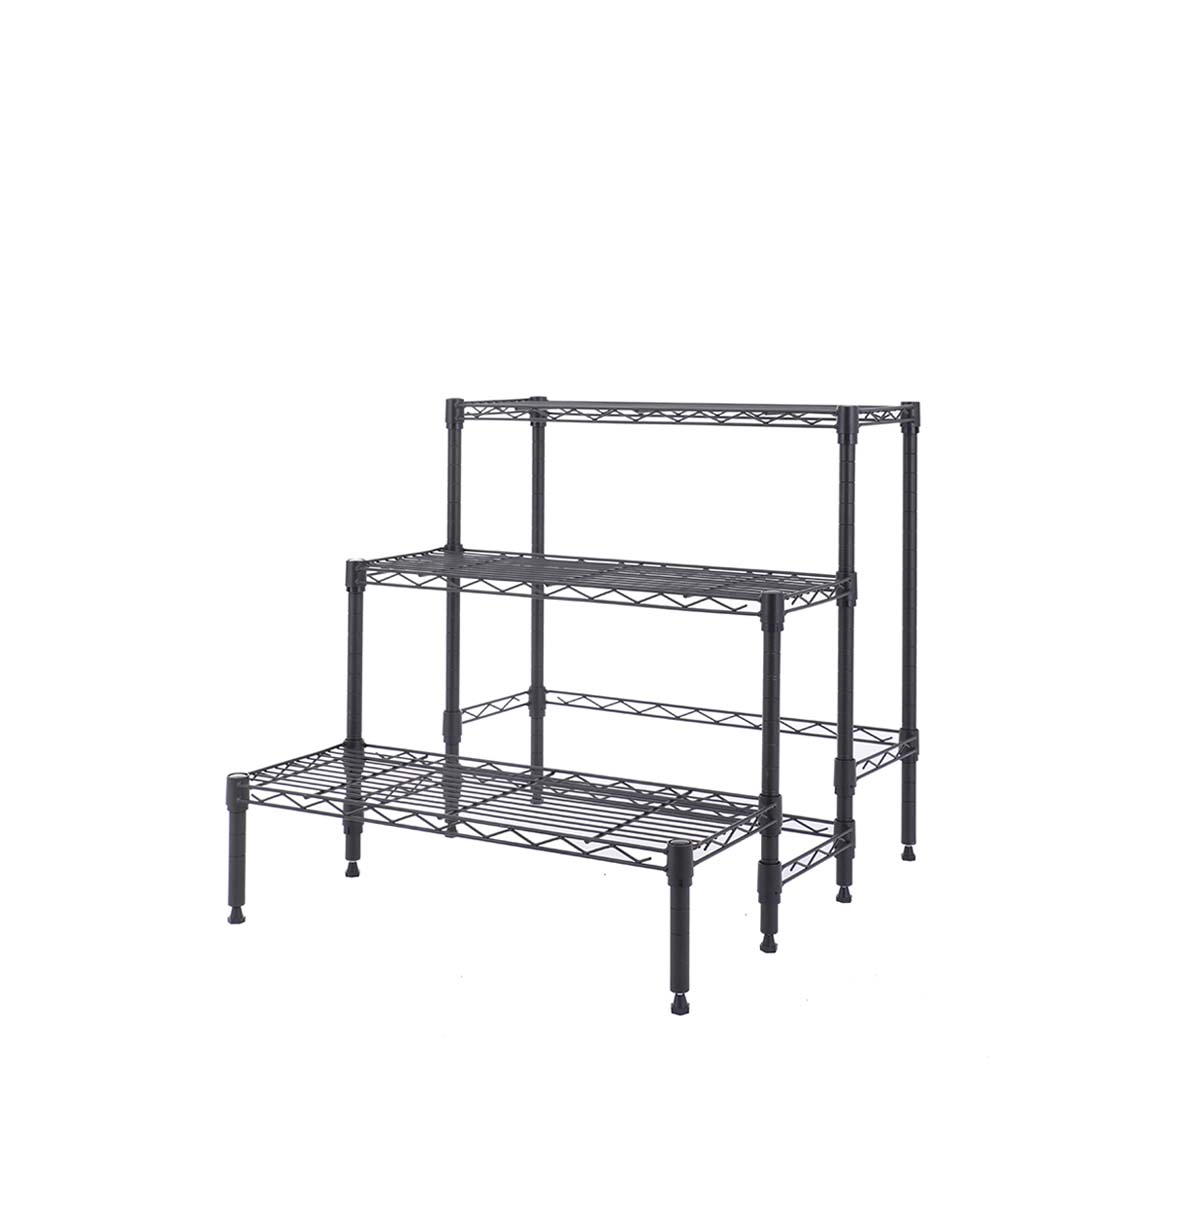 Heavy beam rack features.metal TV stand for 65 inch TV